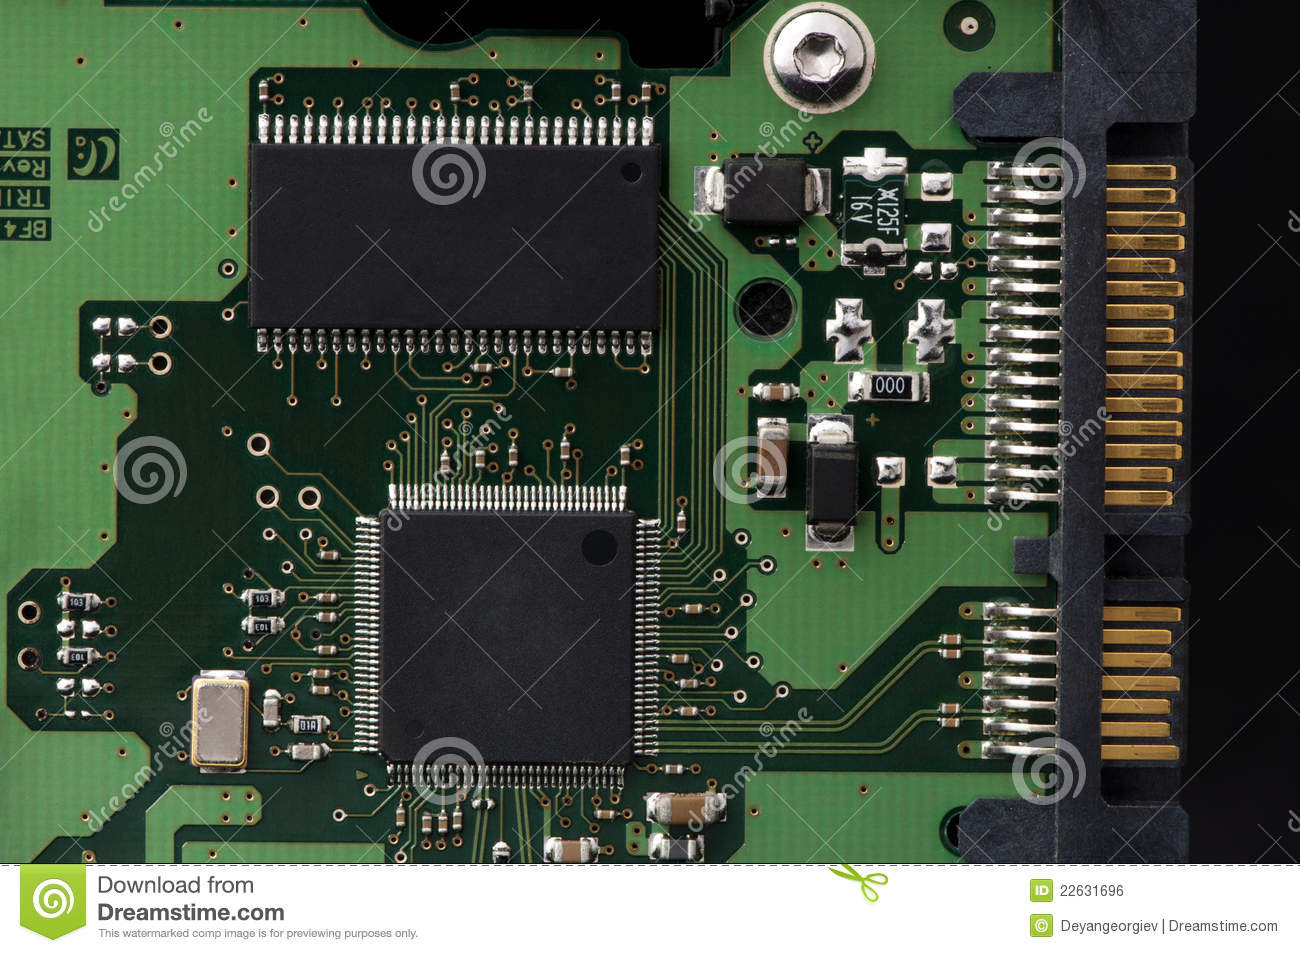 Circuit Board With Chips Royalty Free Stock Image   Image  22631696